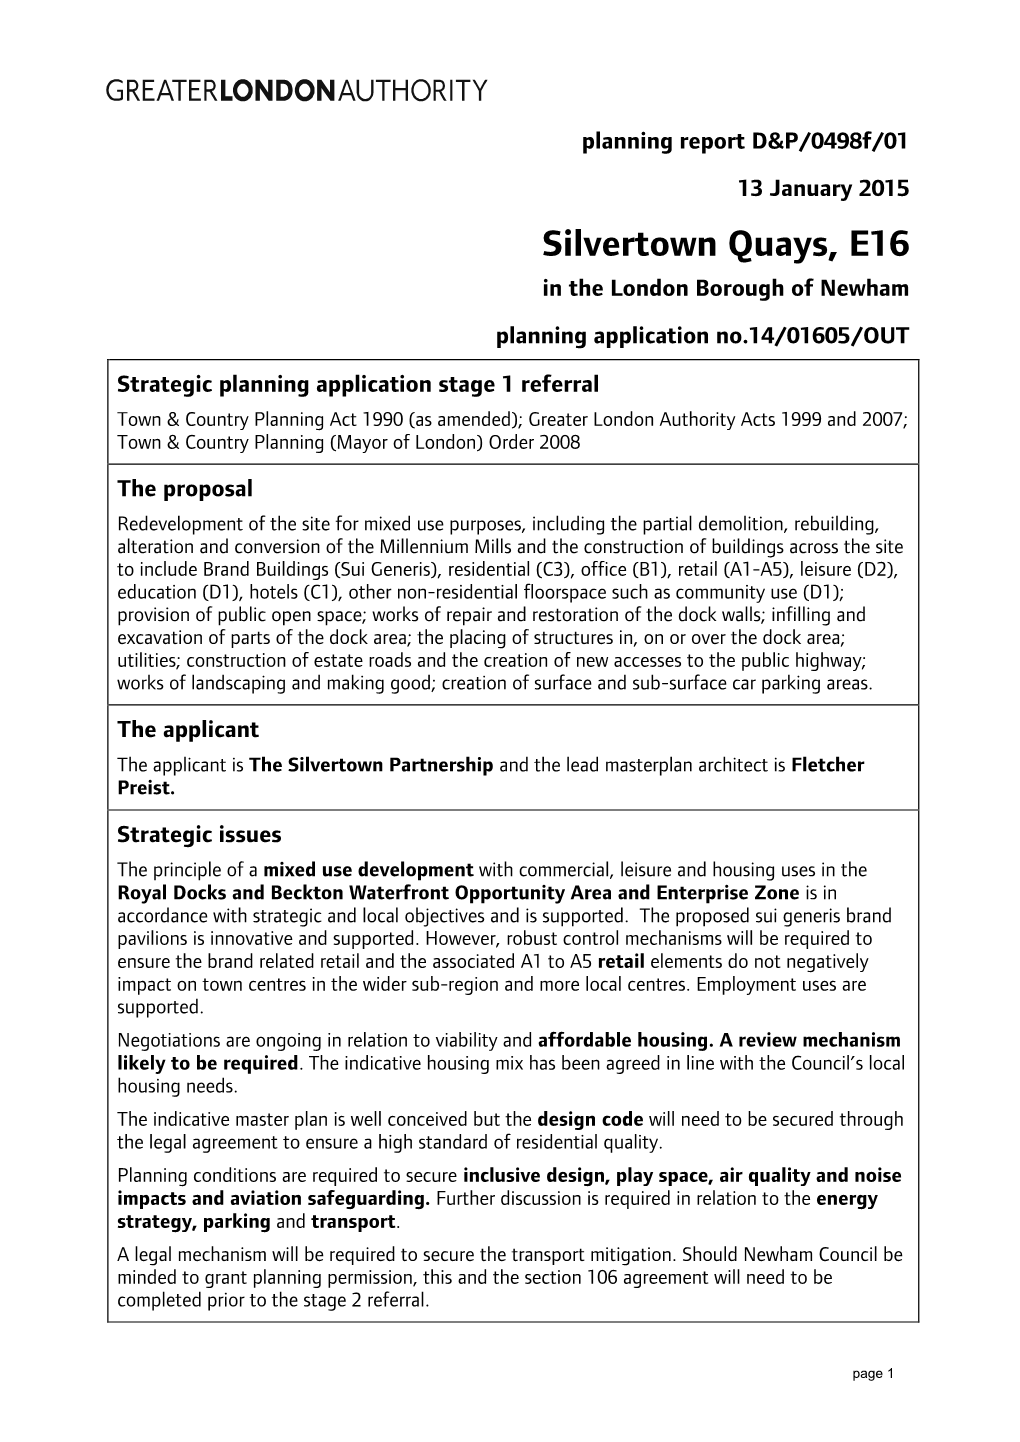 Silvertown Quays, E16 in the London Borough of Newham Planning Application No.14/01605/OUT